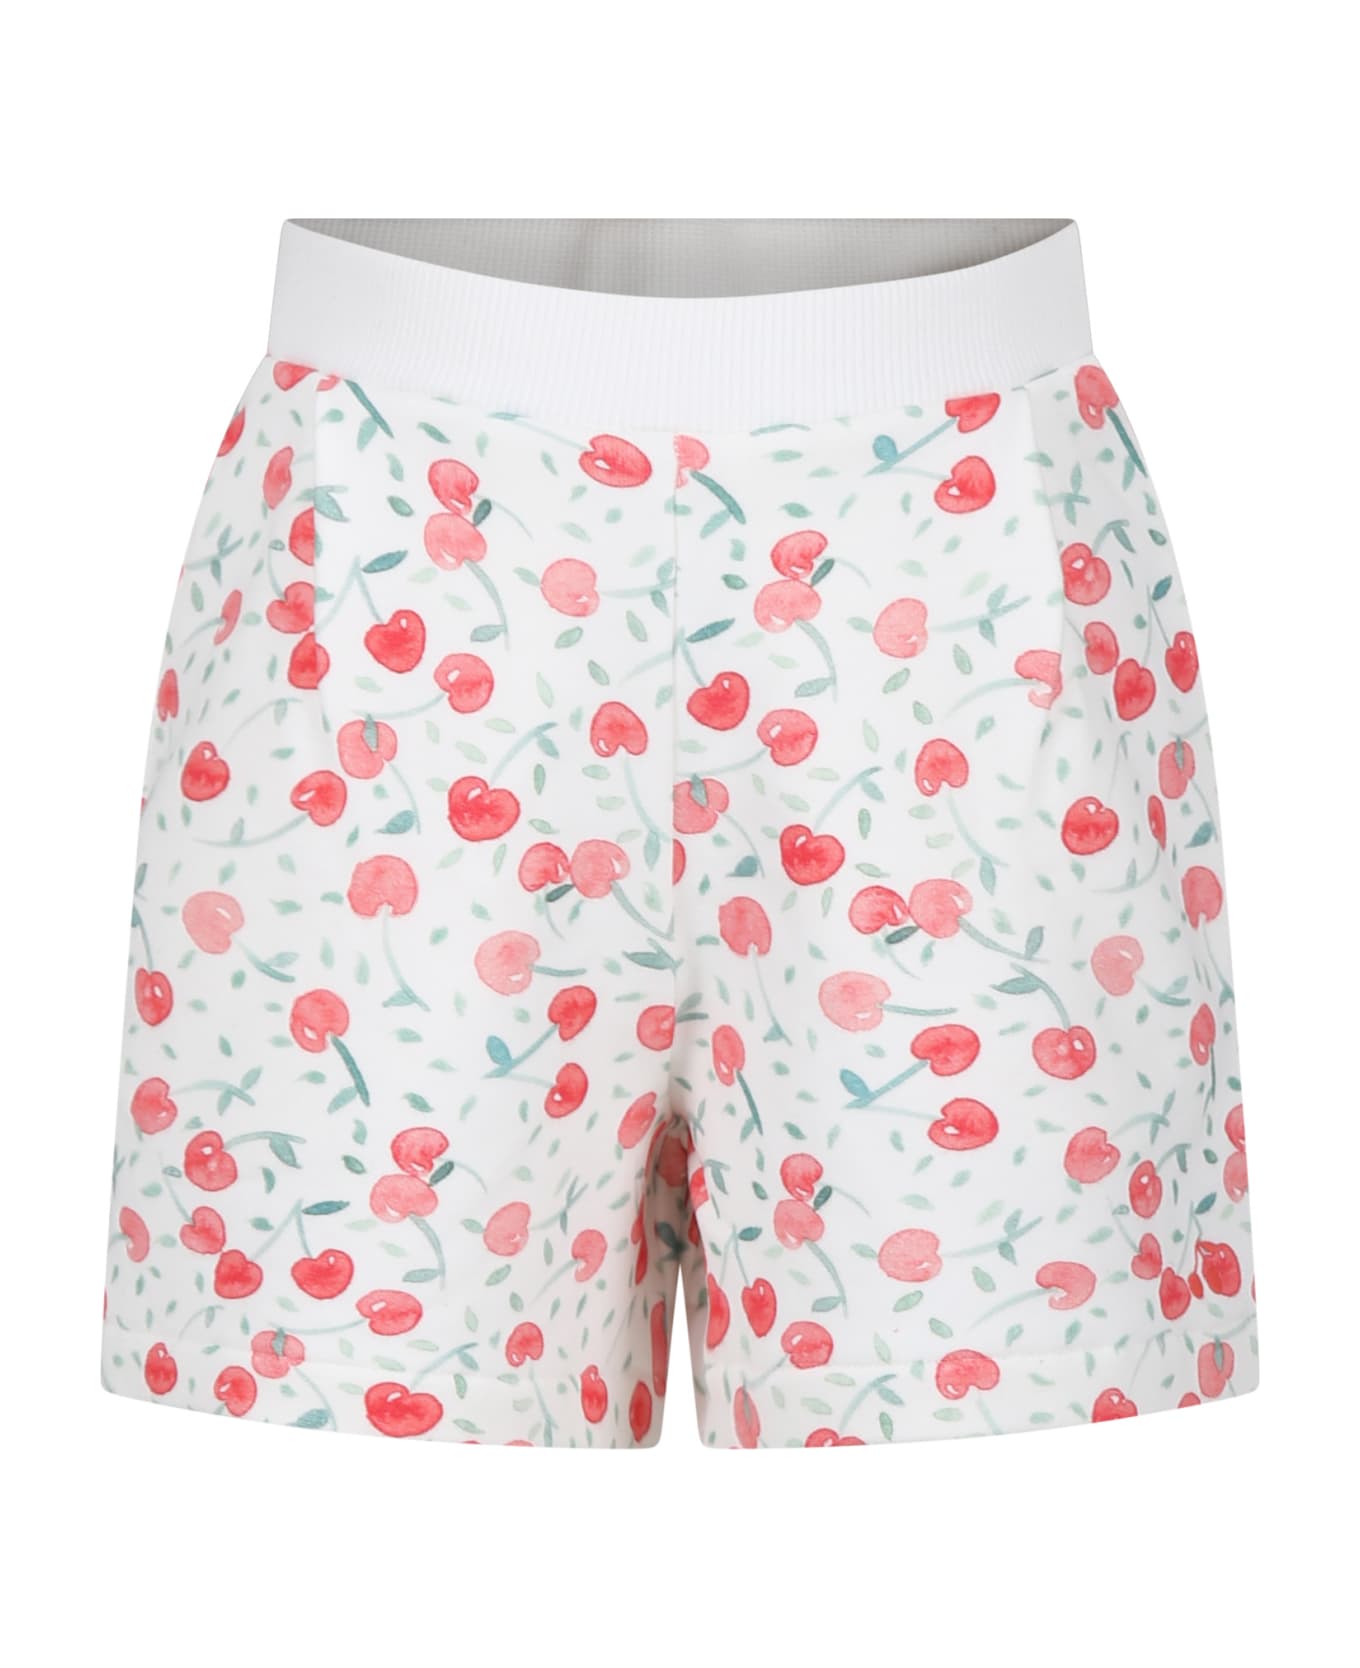 Bonpoint Ivory Sports Shorts For Girl With Cherries - Ivory